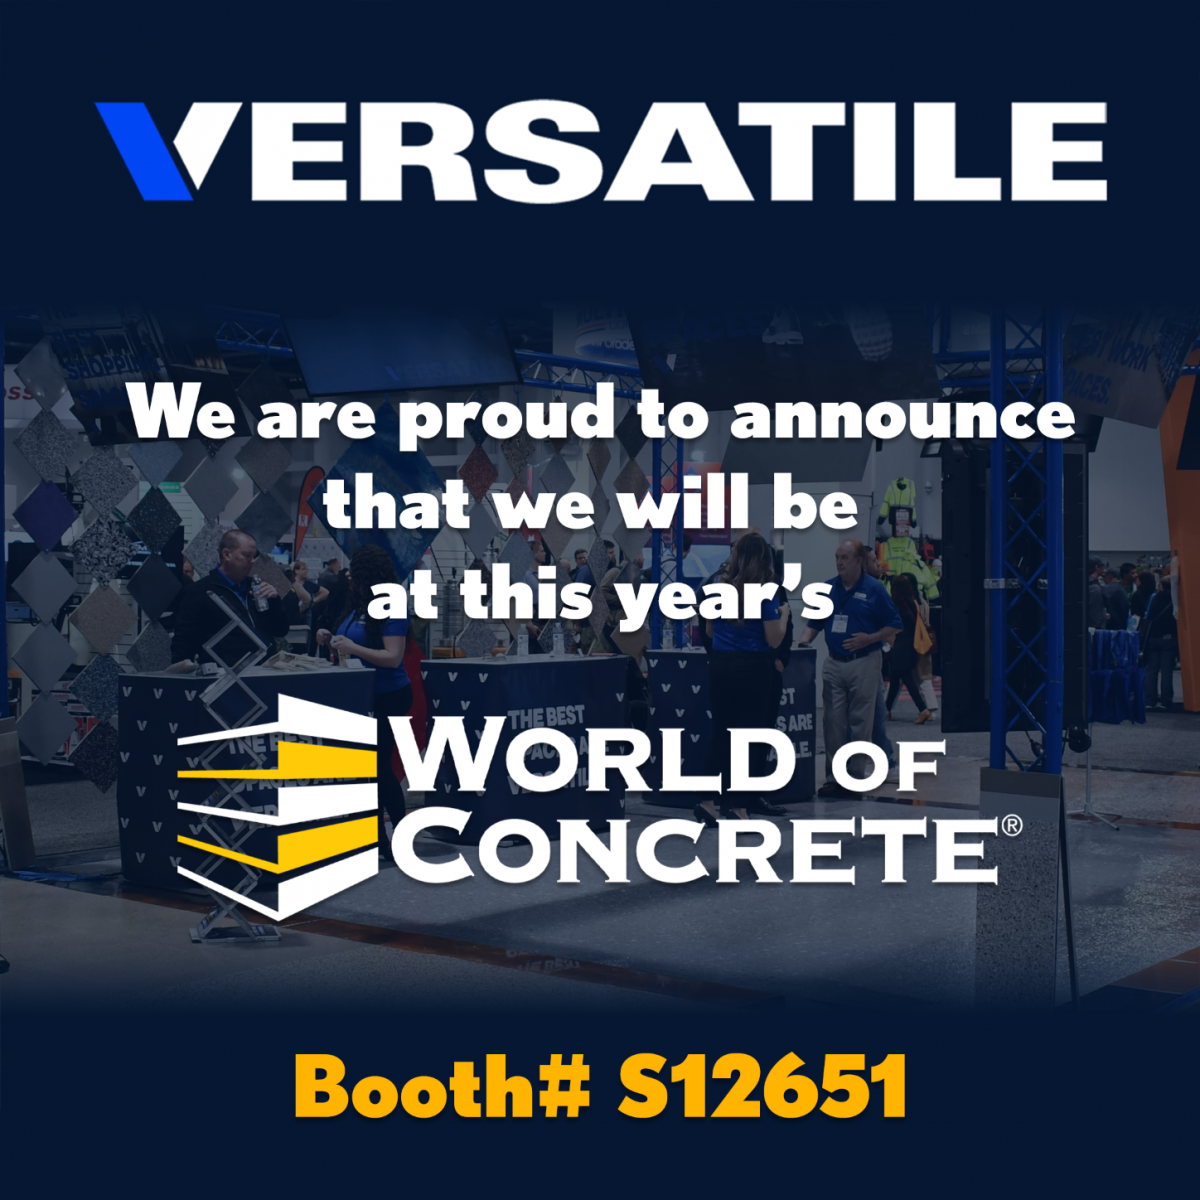 Meet Us at World of Concrete!